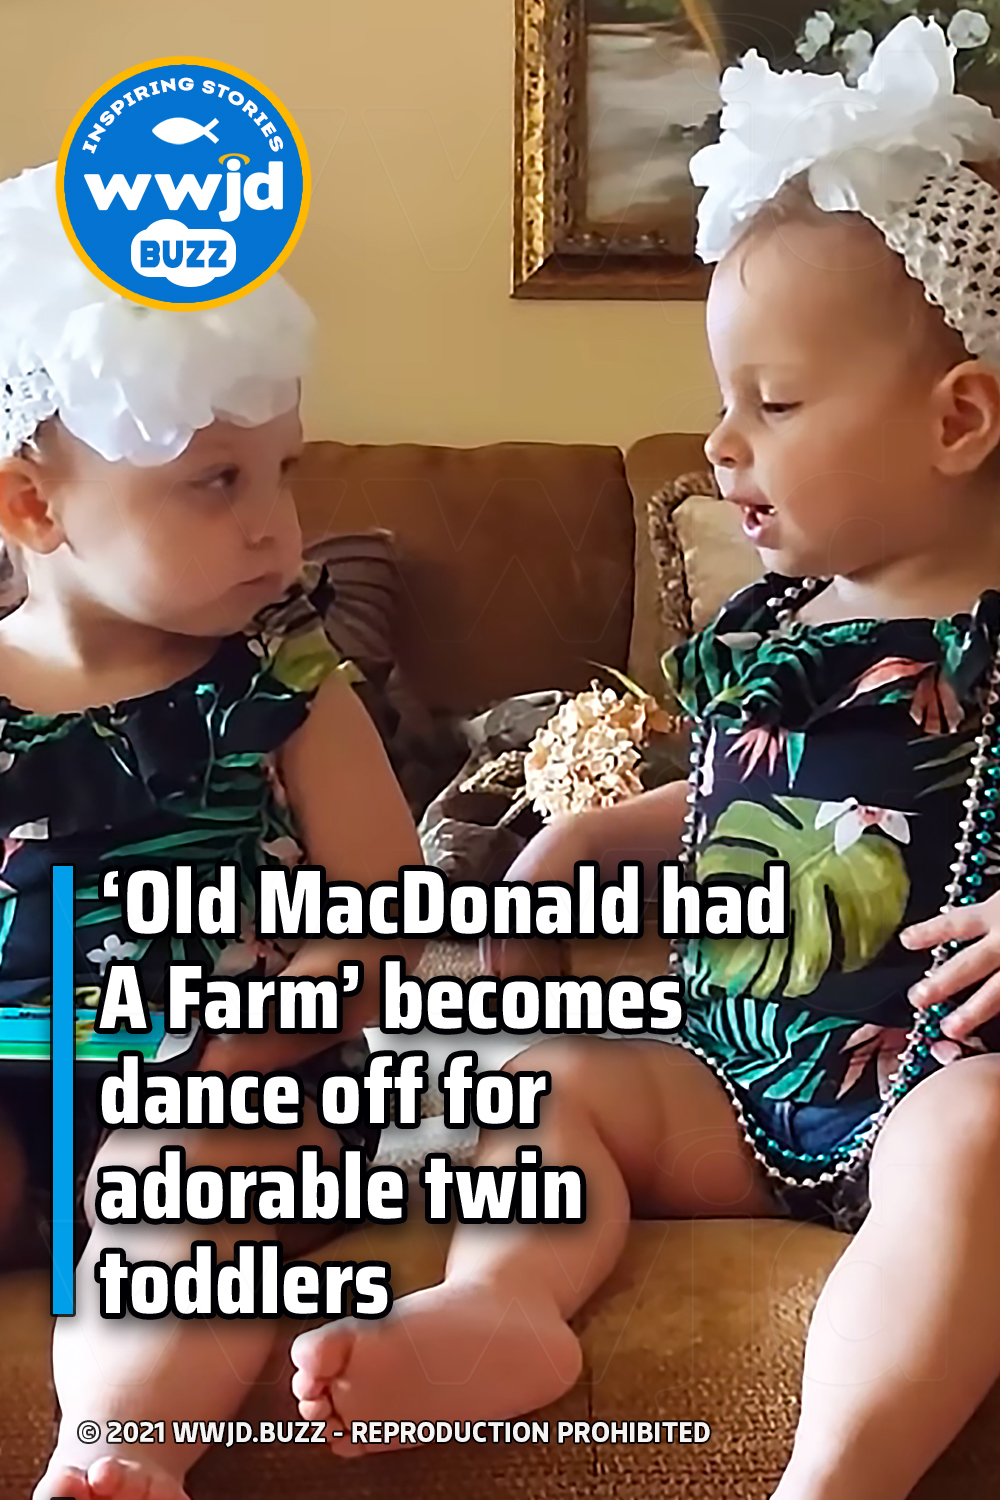 ‘Old MacDonald had A Farm’ becomes dance off for adorable twin toddlers